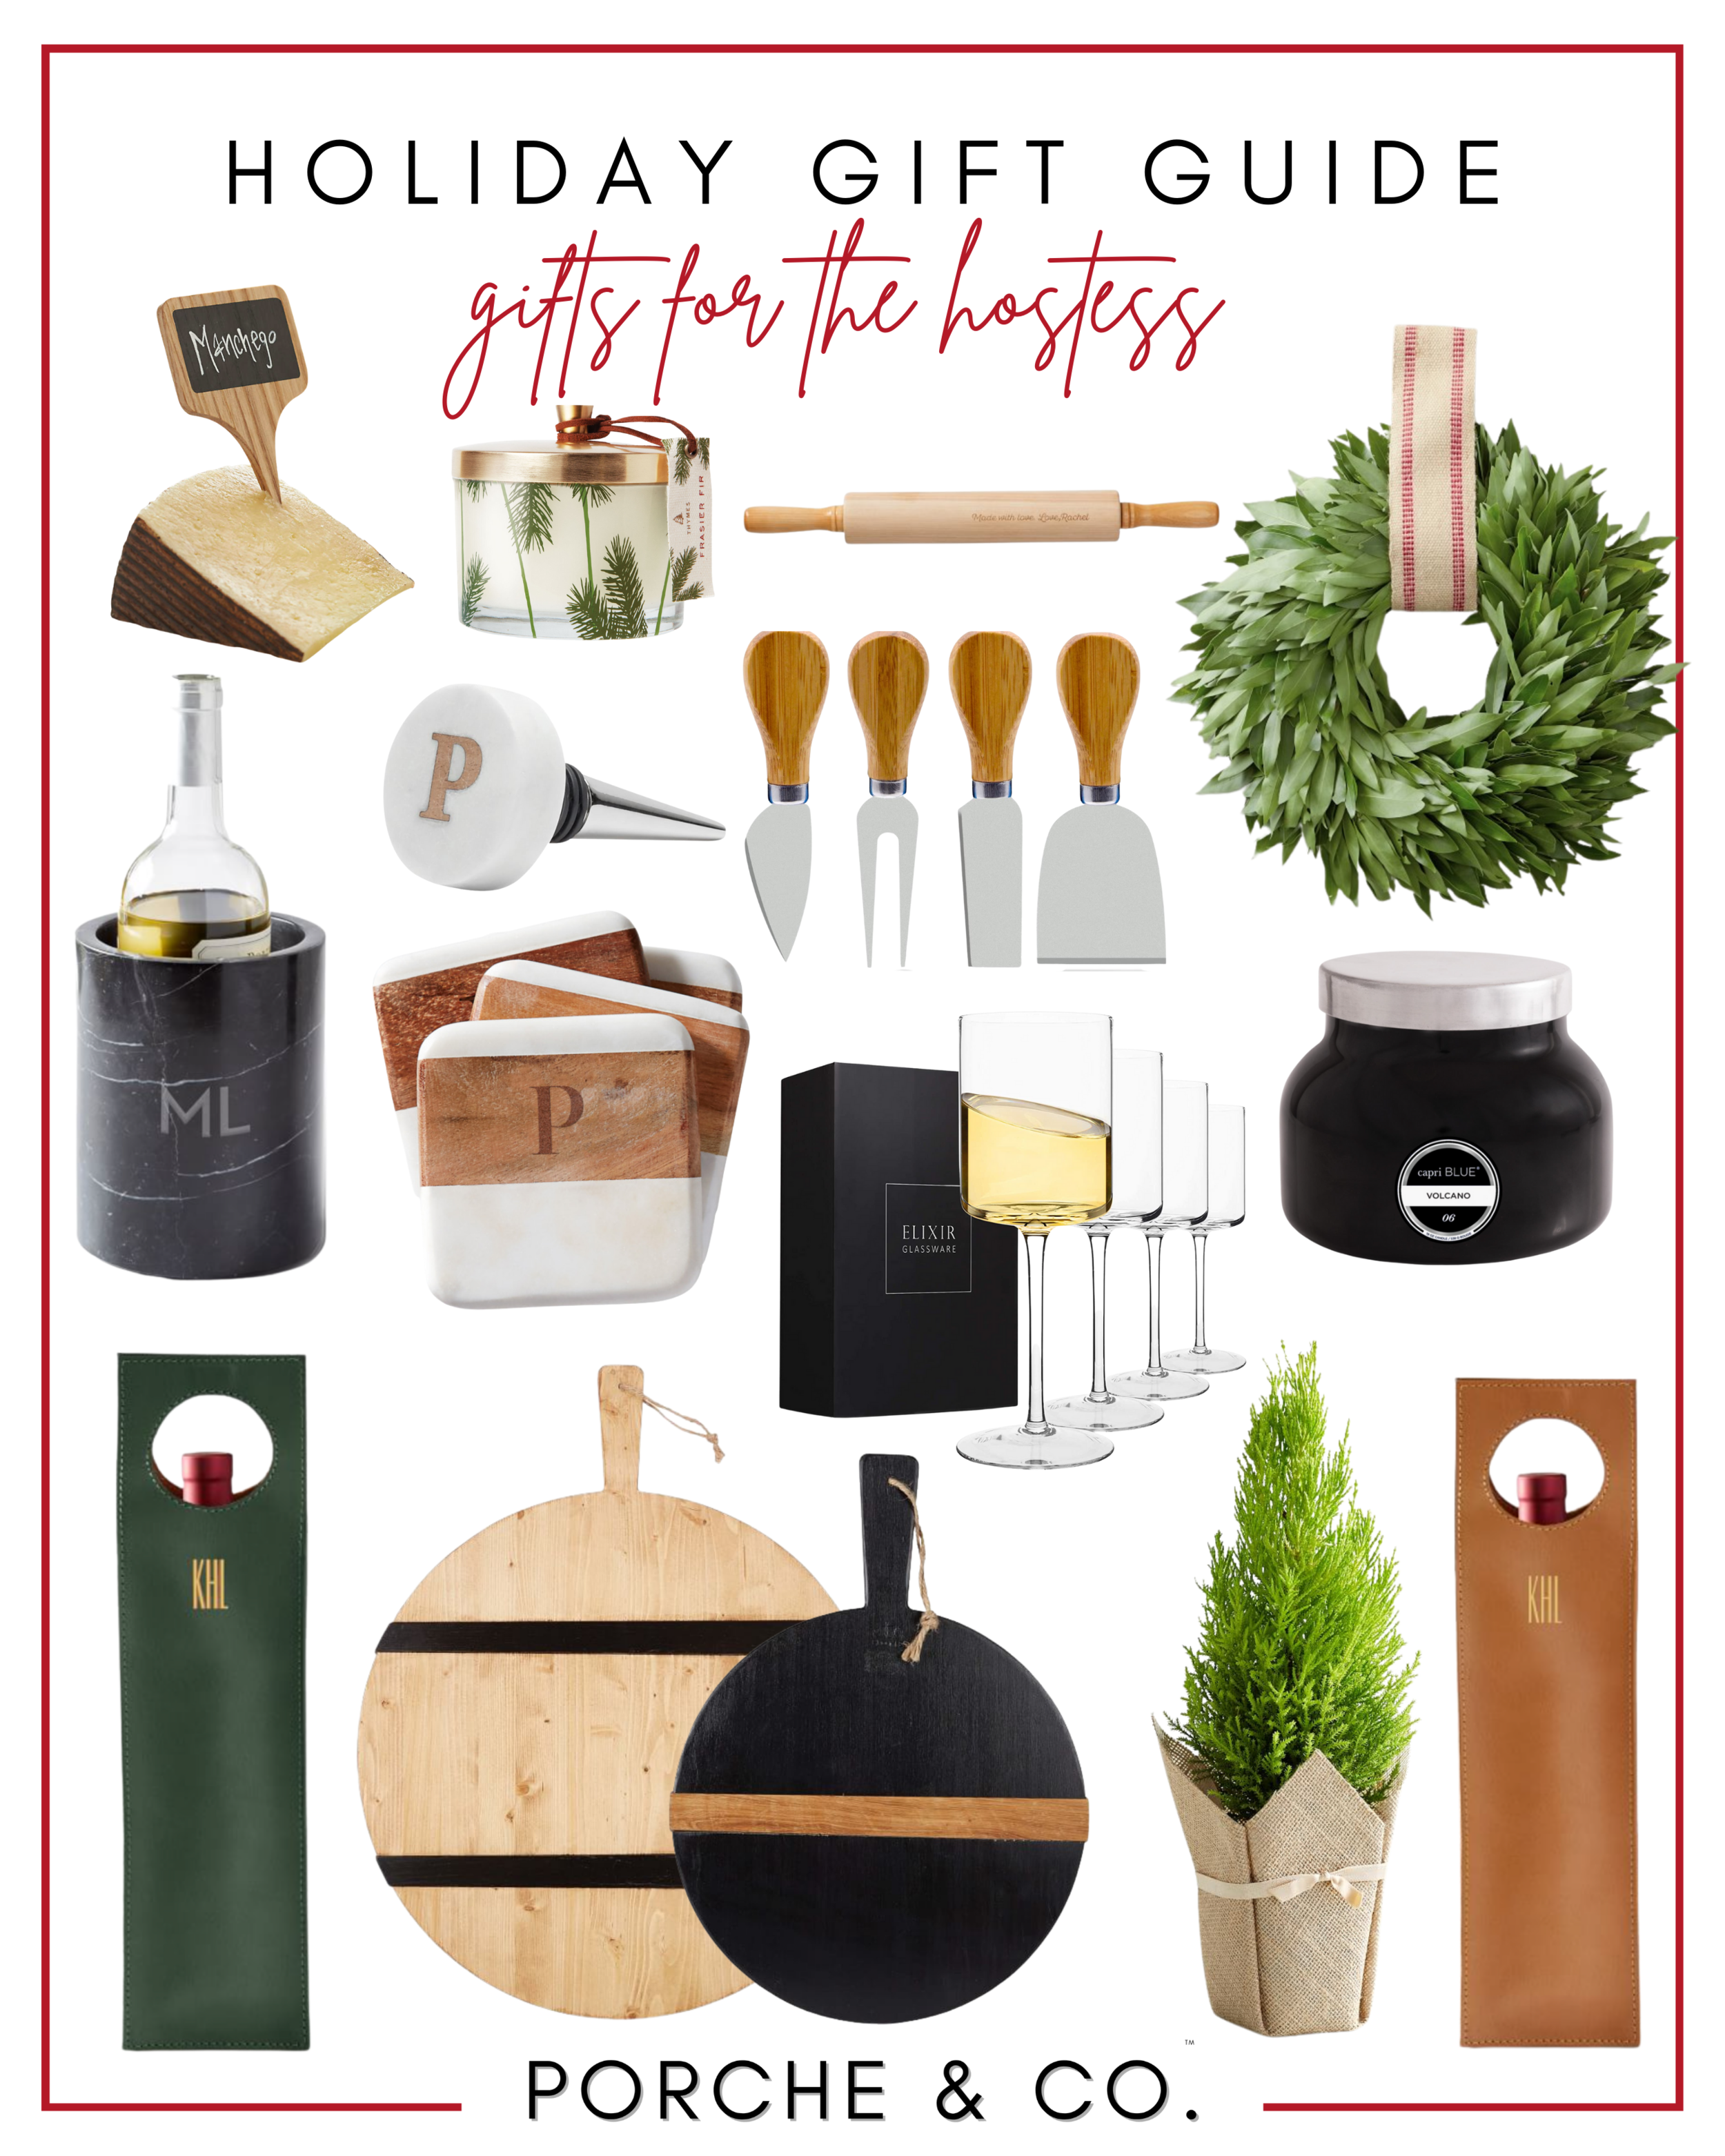 gifts for the hostess (Copy) (Copy)